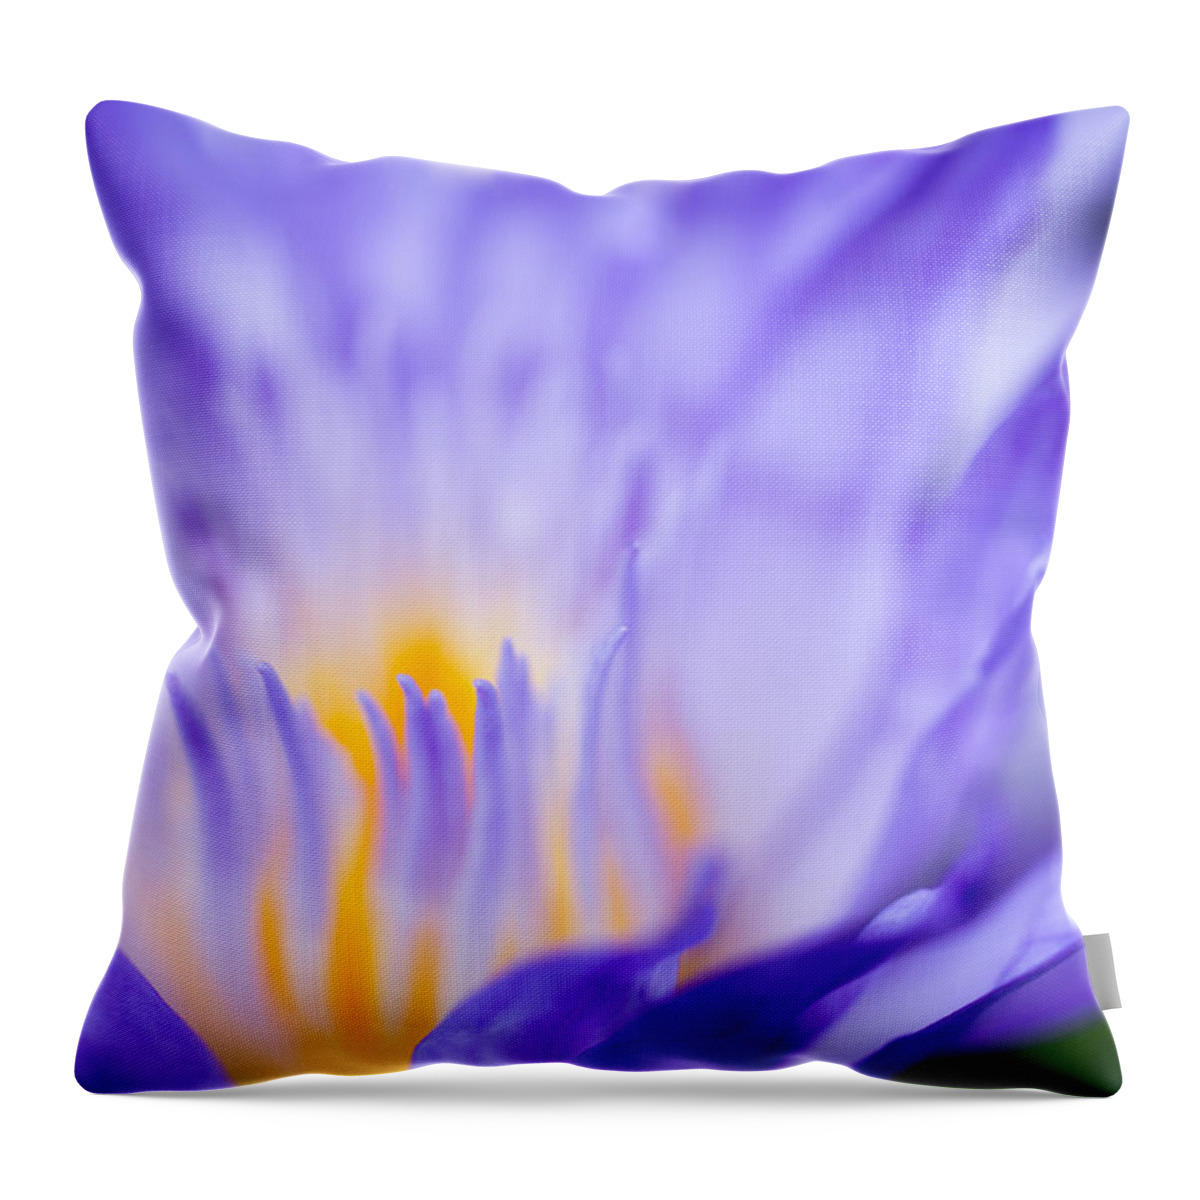 Water Lily Throw Pillow featuring the photograph Star of Siam Waterlily by Priya Ghose